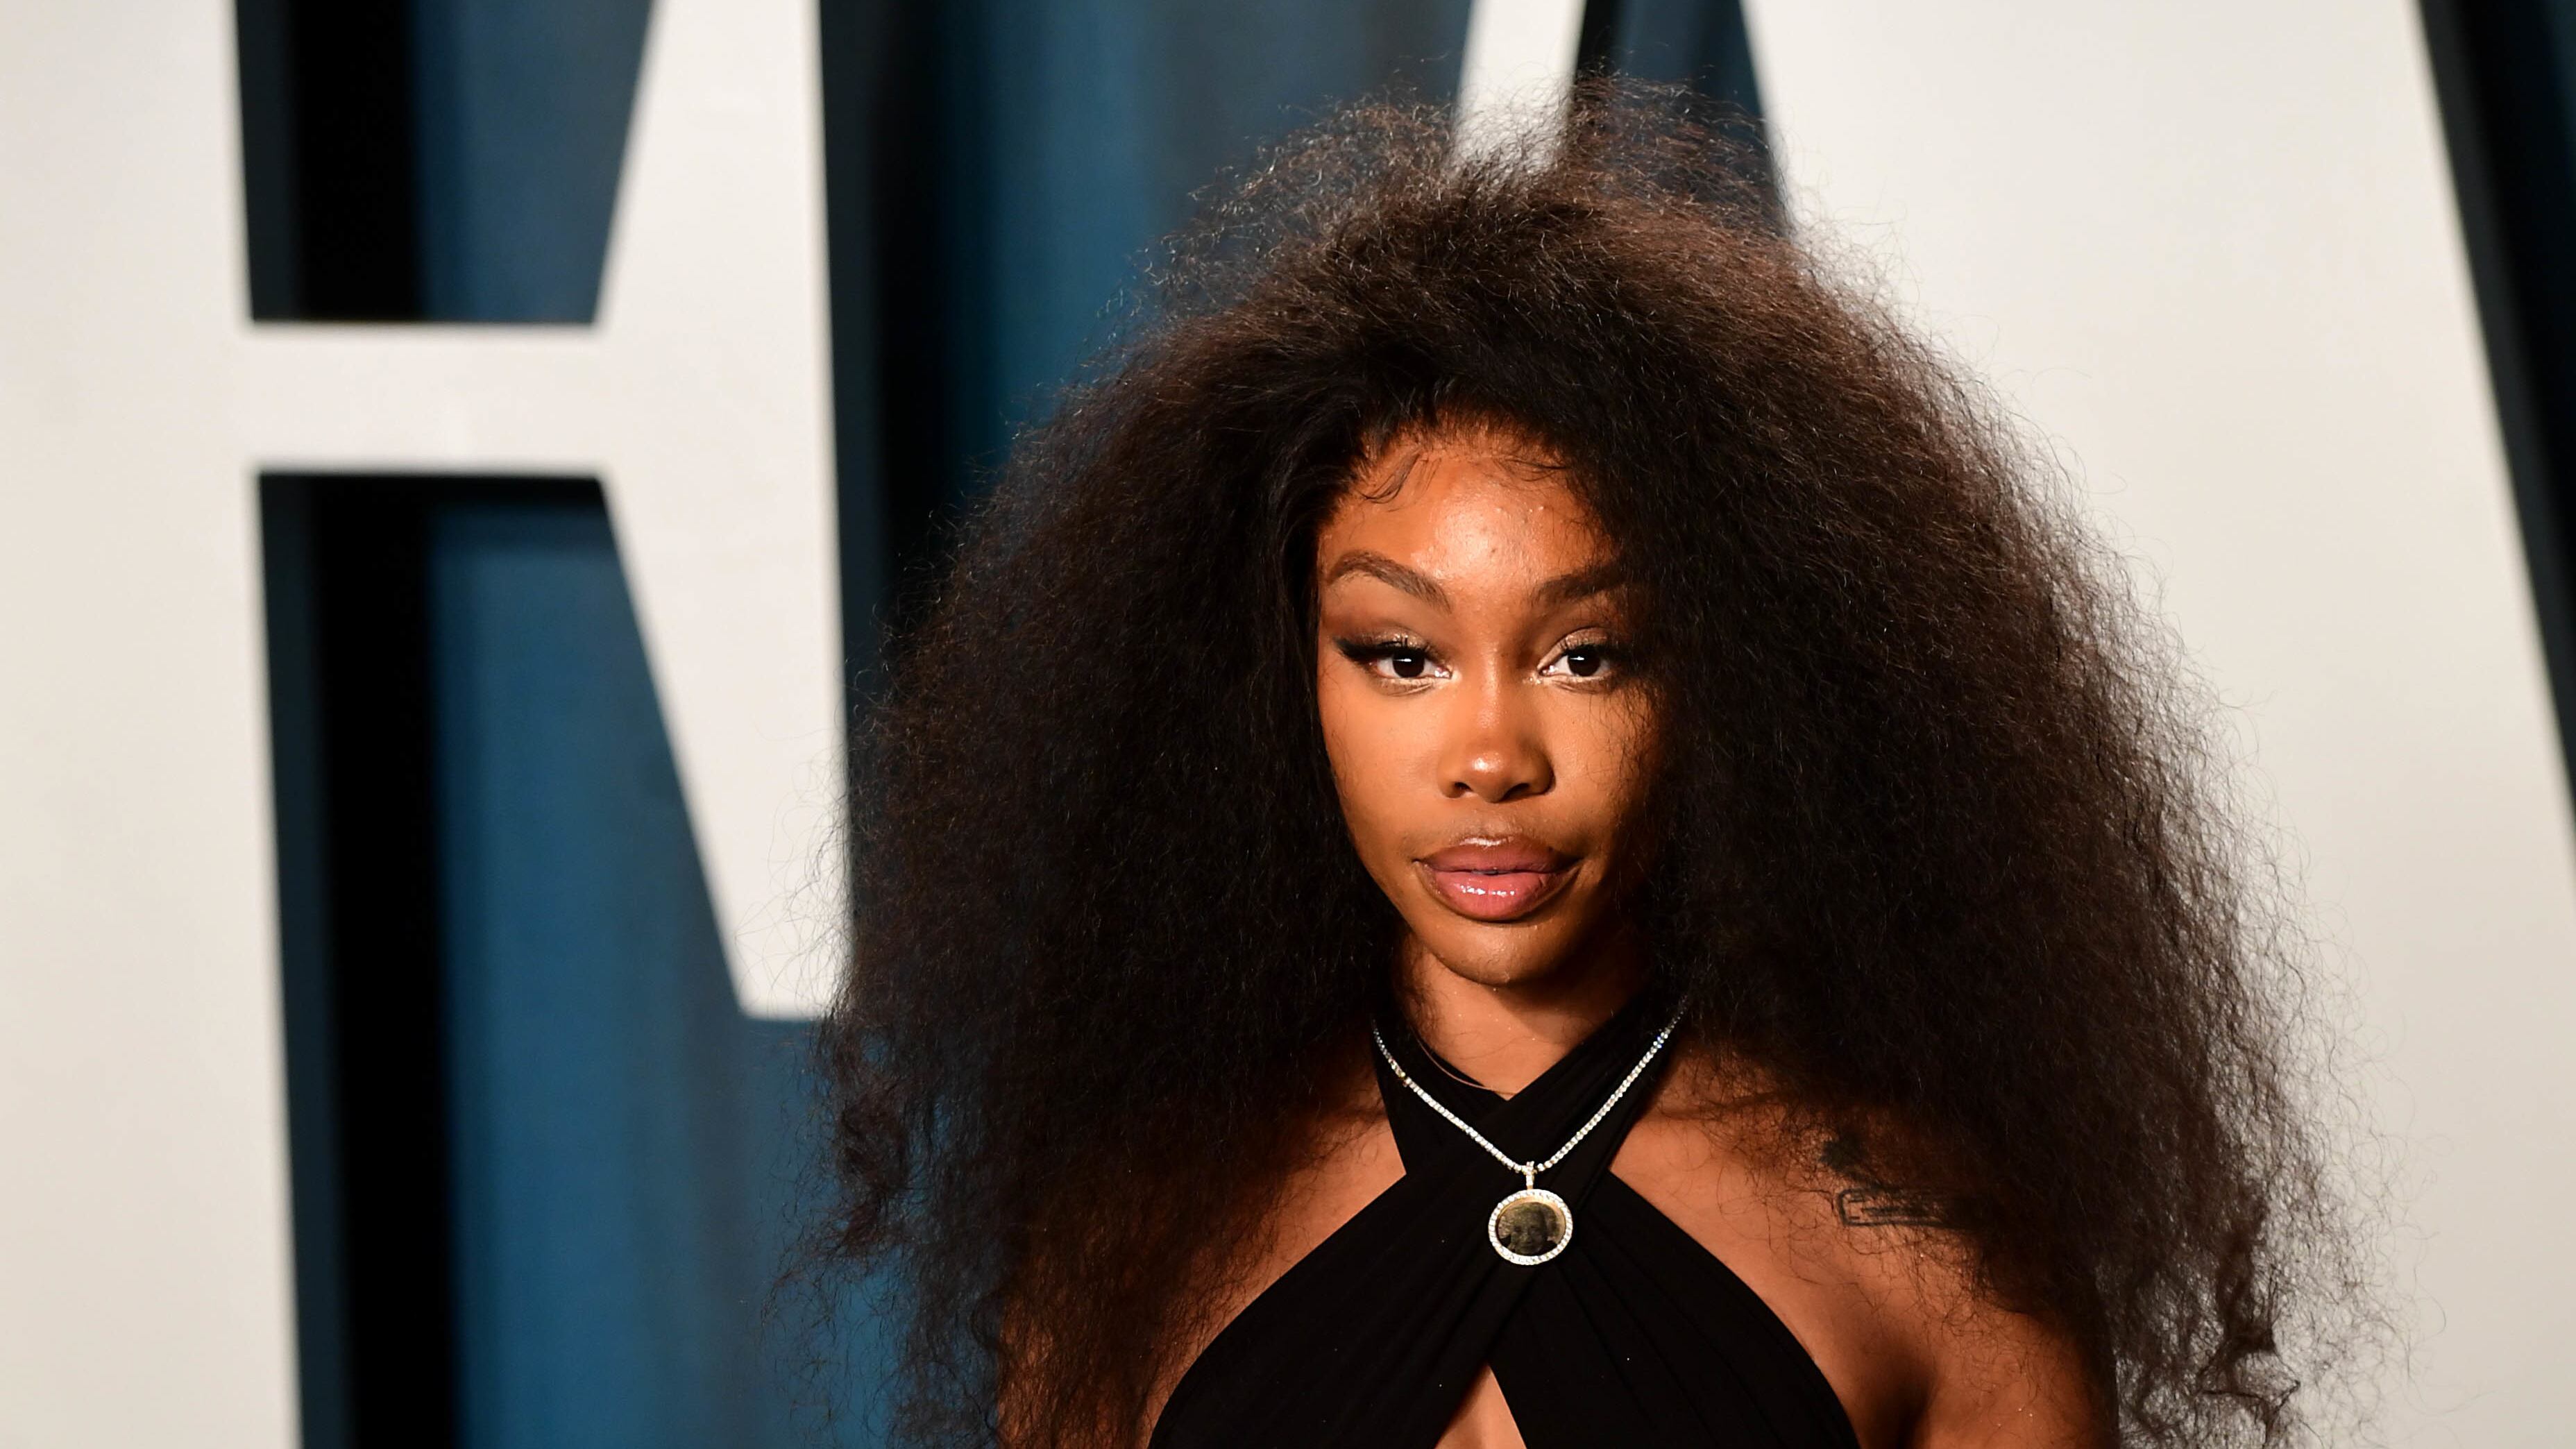 SZA attending the Vanity Fair Oscar Party held at the Wallis Annenberg Center for the Performing Arts in Beverly Hills, Los Angeles, California, USA